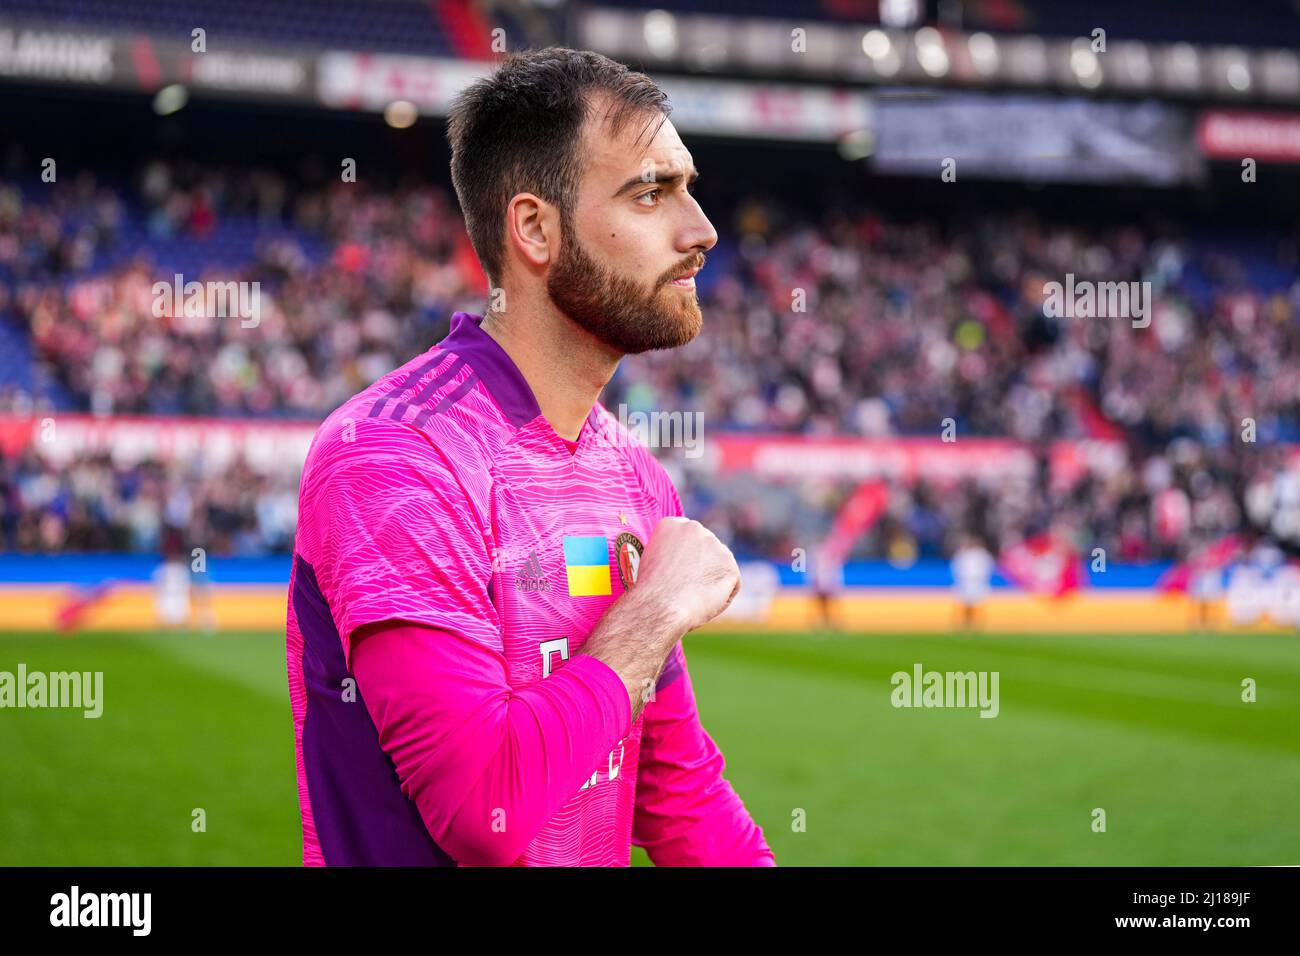 Rotterdam - goalkeeper Valentin Cojocaru of Feyenoord during the charity  match between Feyenoord v RKC Waalwijk at de Kuip on 23 March 2022 in  Rotterdam, Netherlands. (Box to Box Pictures/Tom Bode Stock